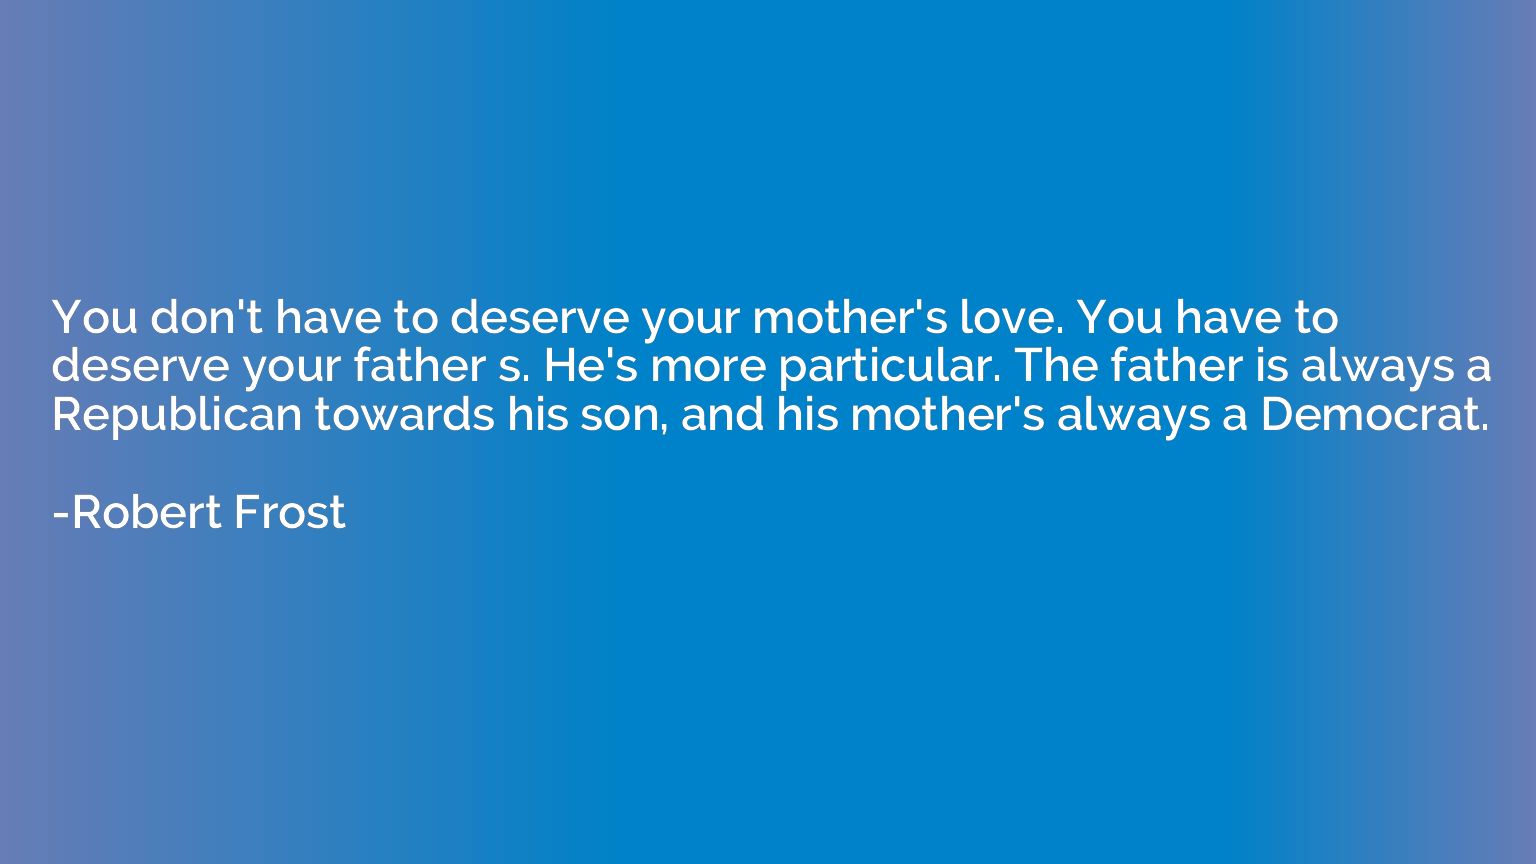 You don't have to deserve your mother's love. You have to de